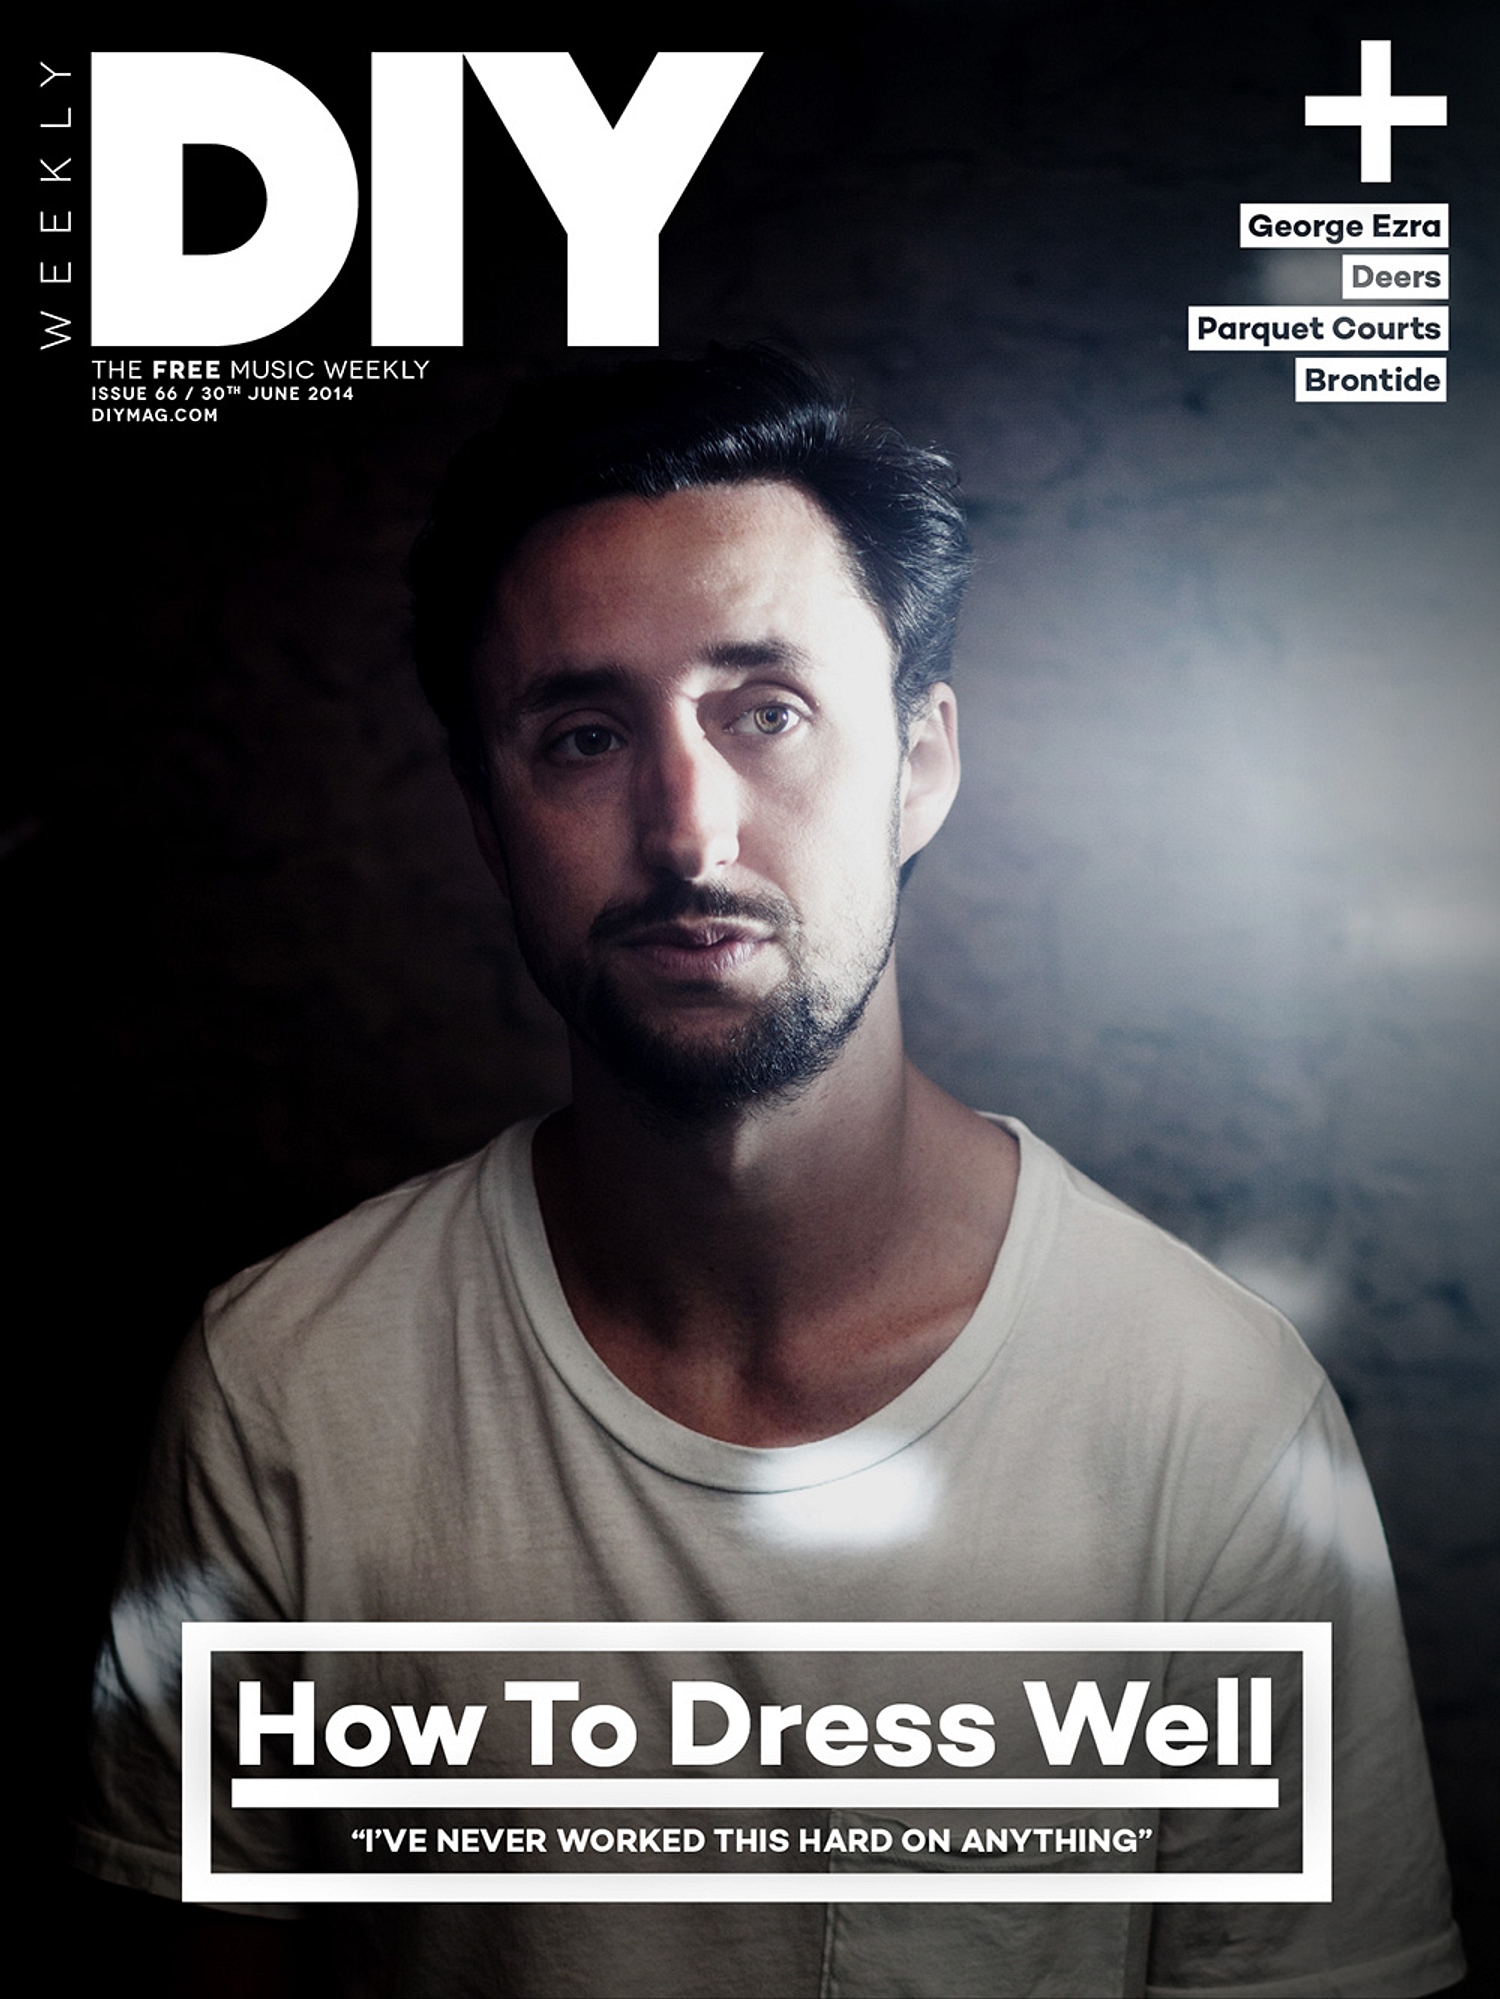 How To Dress Well takes next week's DIY Weekly cover